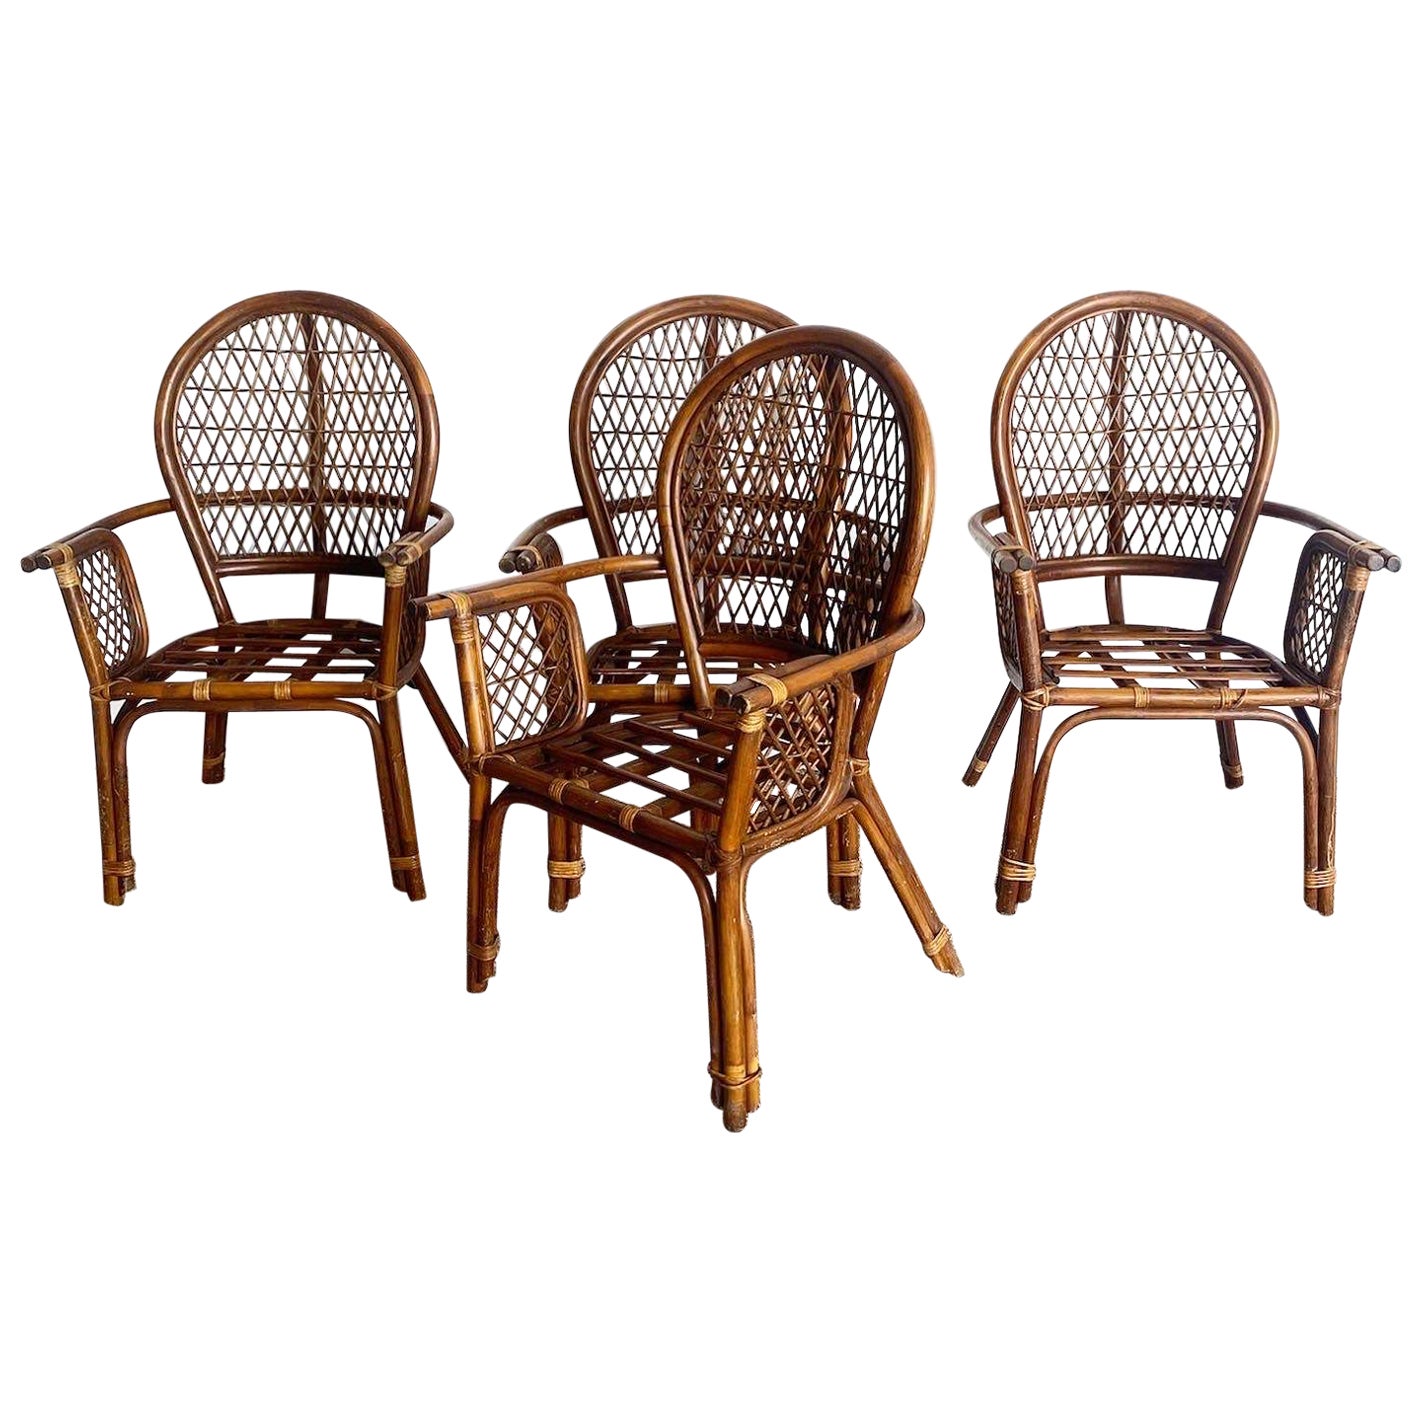 Boho Chic Bamboo Rattan Balloon Back Arm Chairs - Set of 4 For Sale